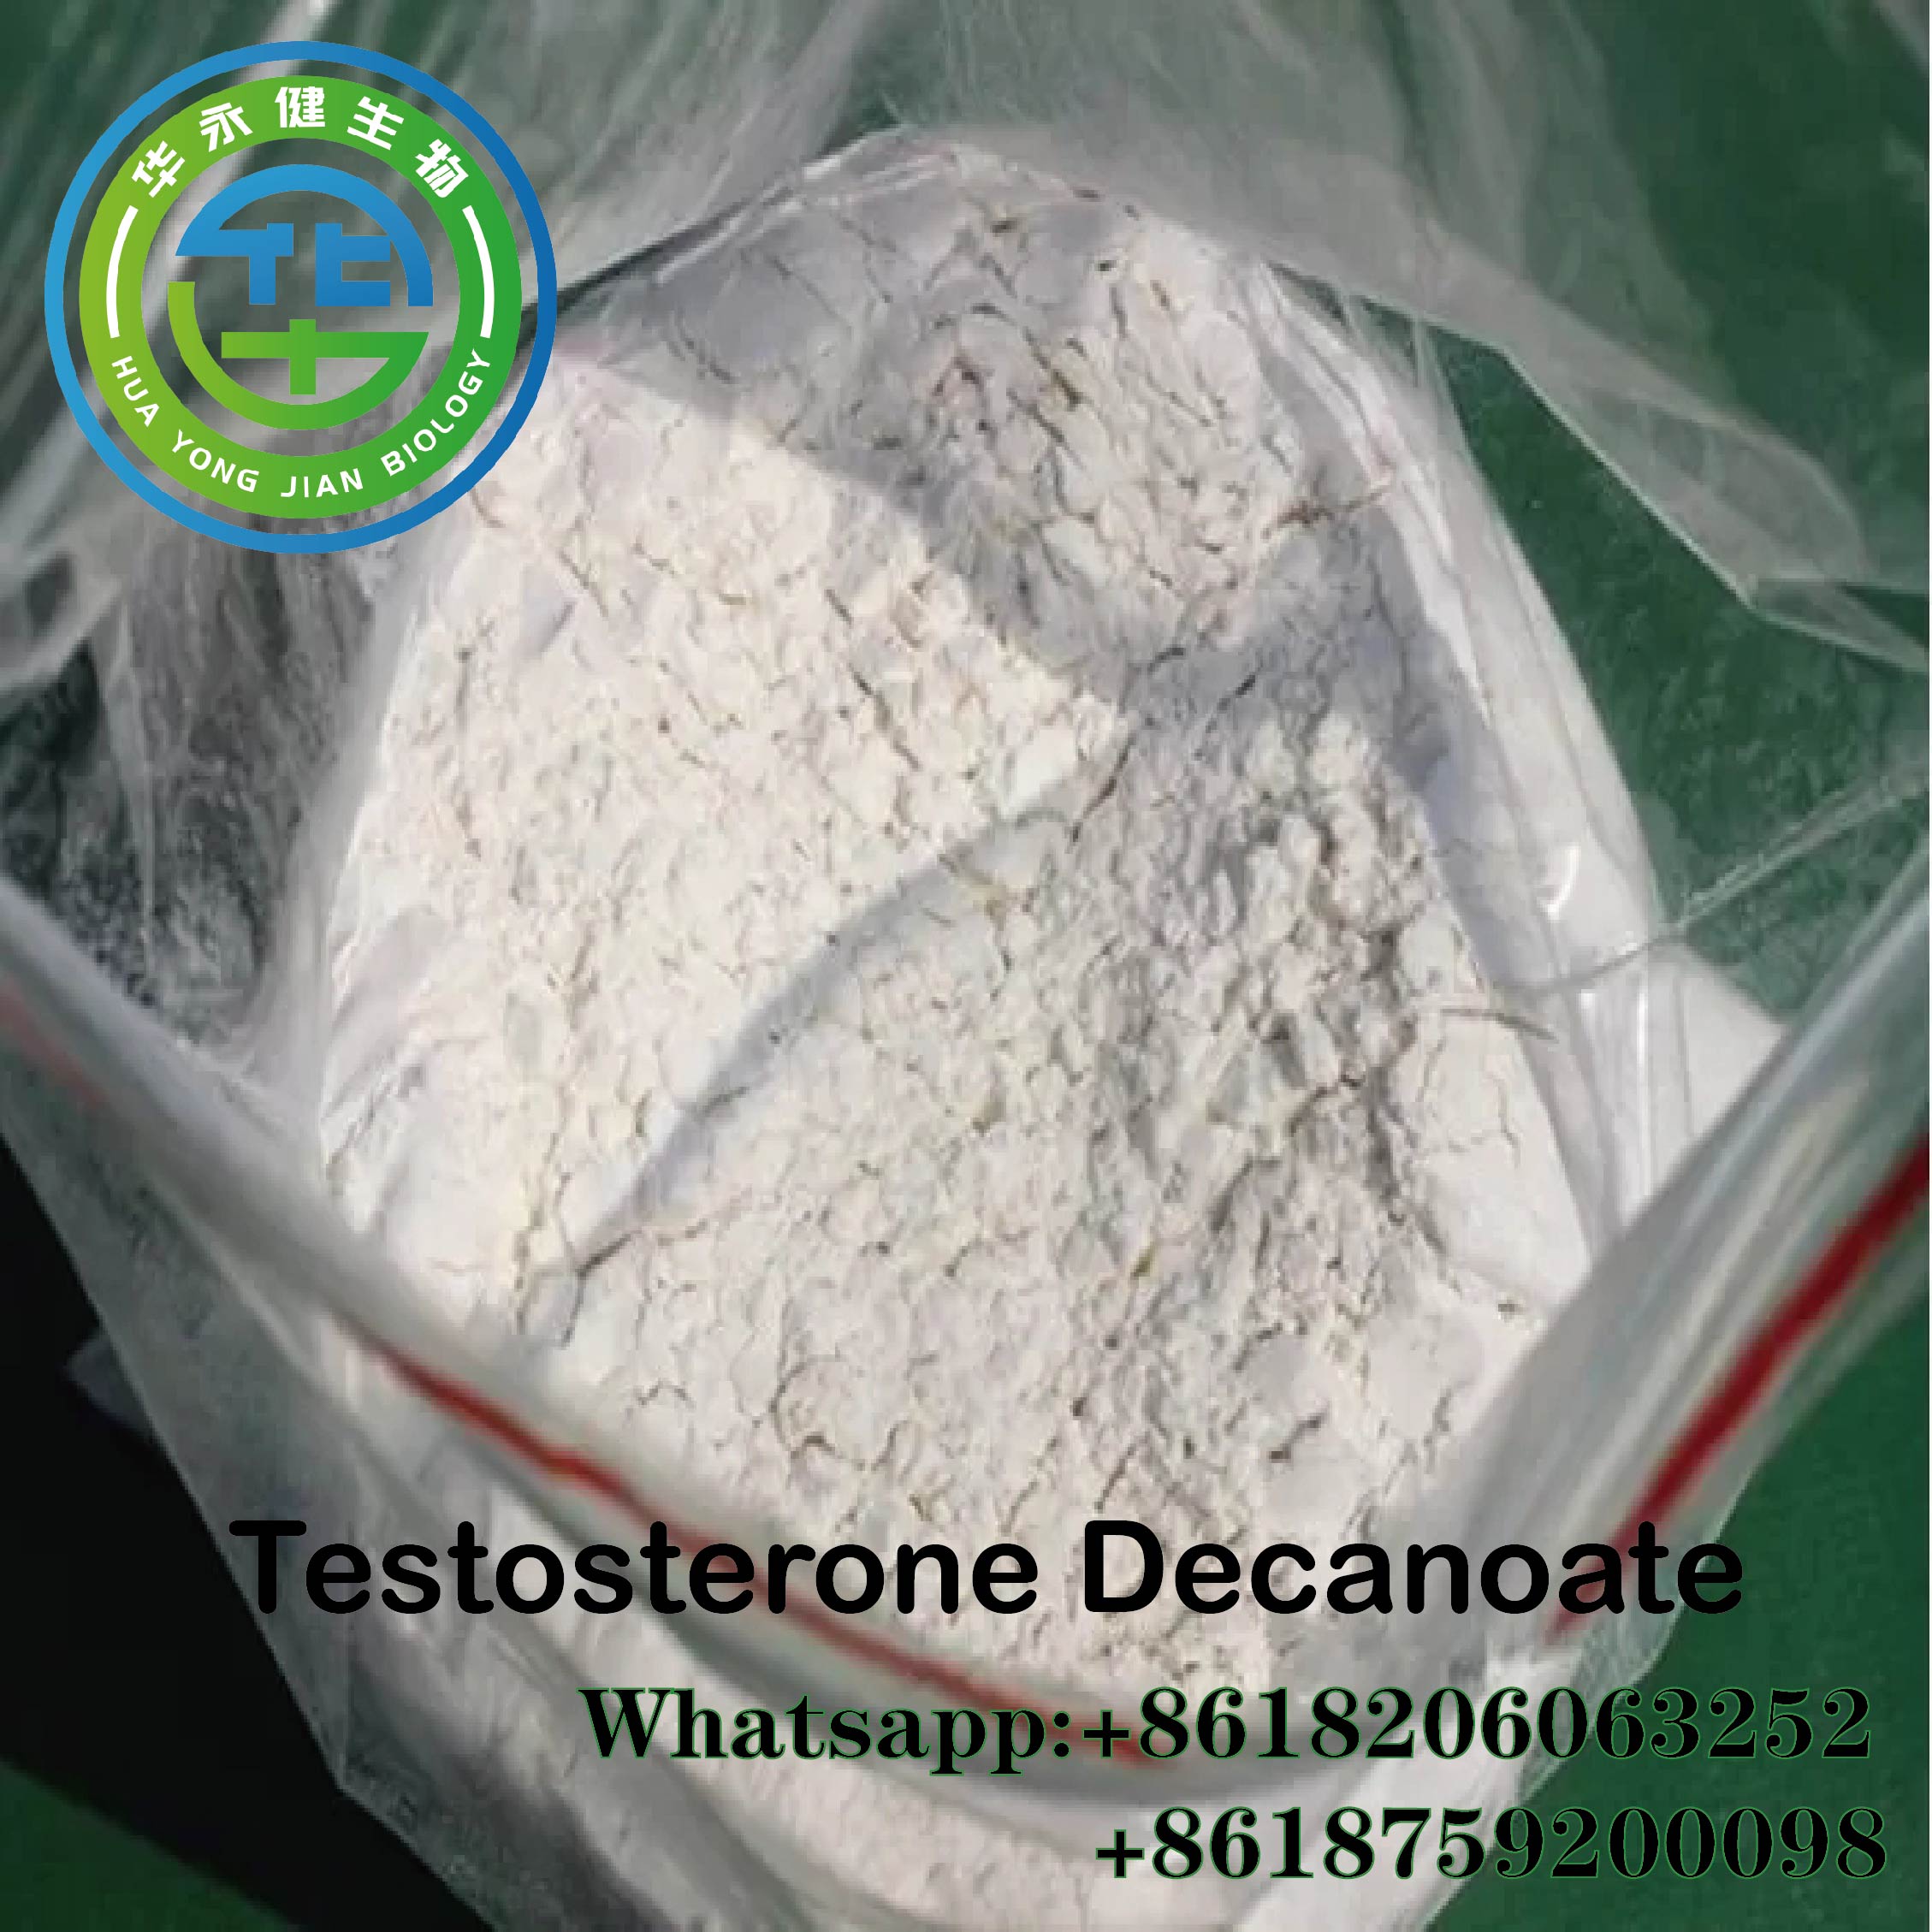 Anabolic Steroid Testosterone Decanoate /Test Decanoate Raw Powder for Weight Loss CAS:5721-91-5